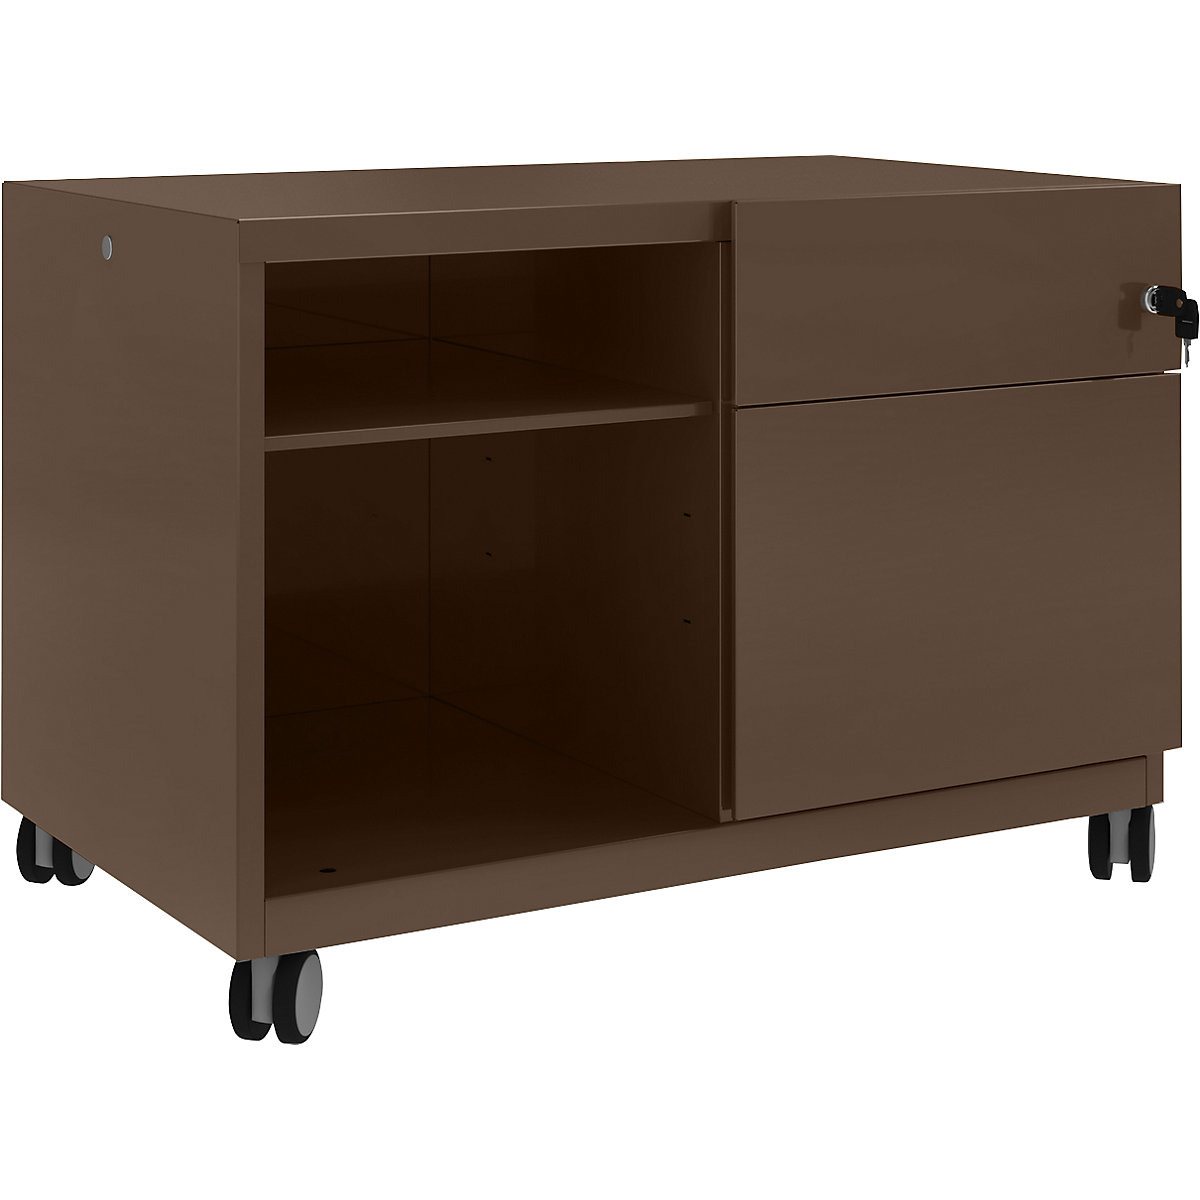 Note™ CADDY, HxBxT 563 x 800 x 490 mm – BISLEY, 1 universal drawer and suspension file drawer on the right, coffee-6